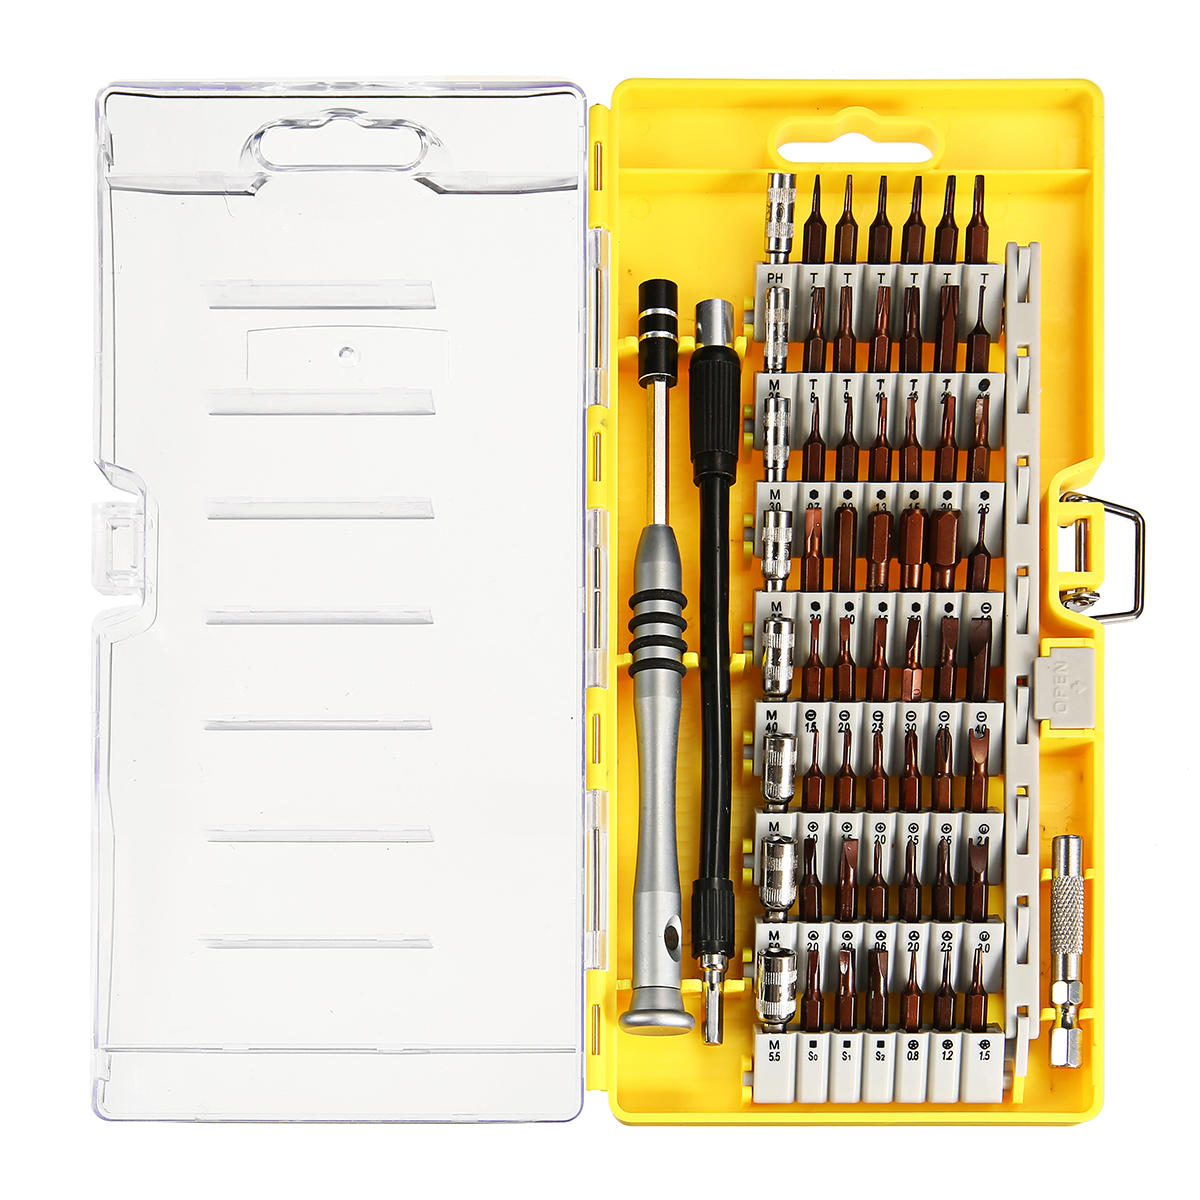 60 in 1 Precision Screwdrivers Set S2 Alloy Steel Magnetic Bits Professional Electronics Repair Tool Kit For Watch Phone